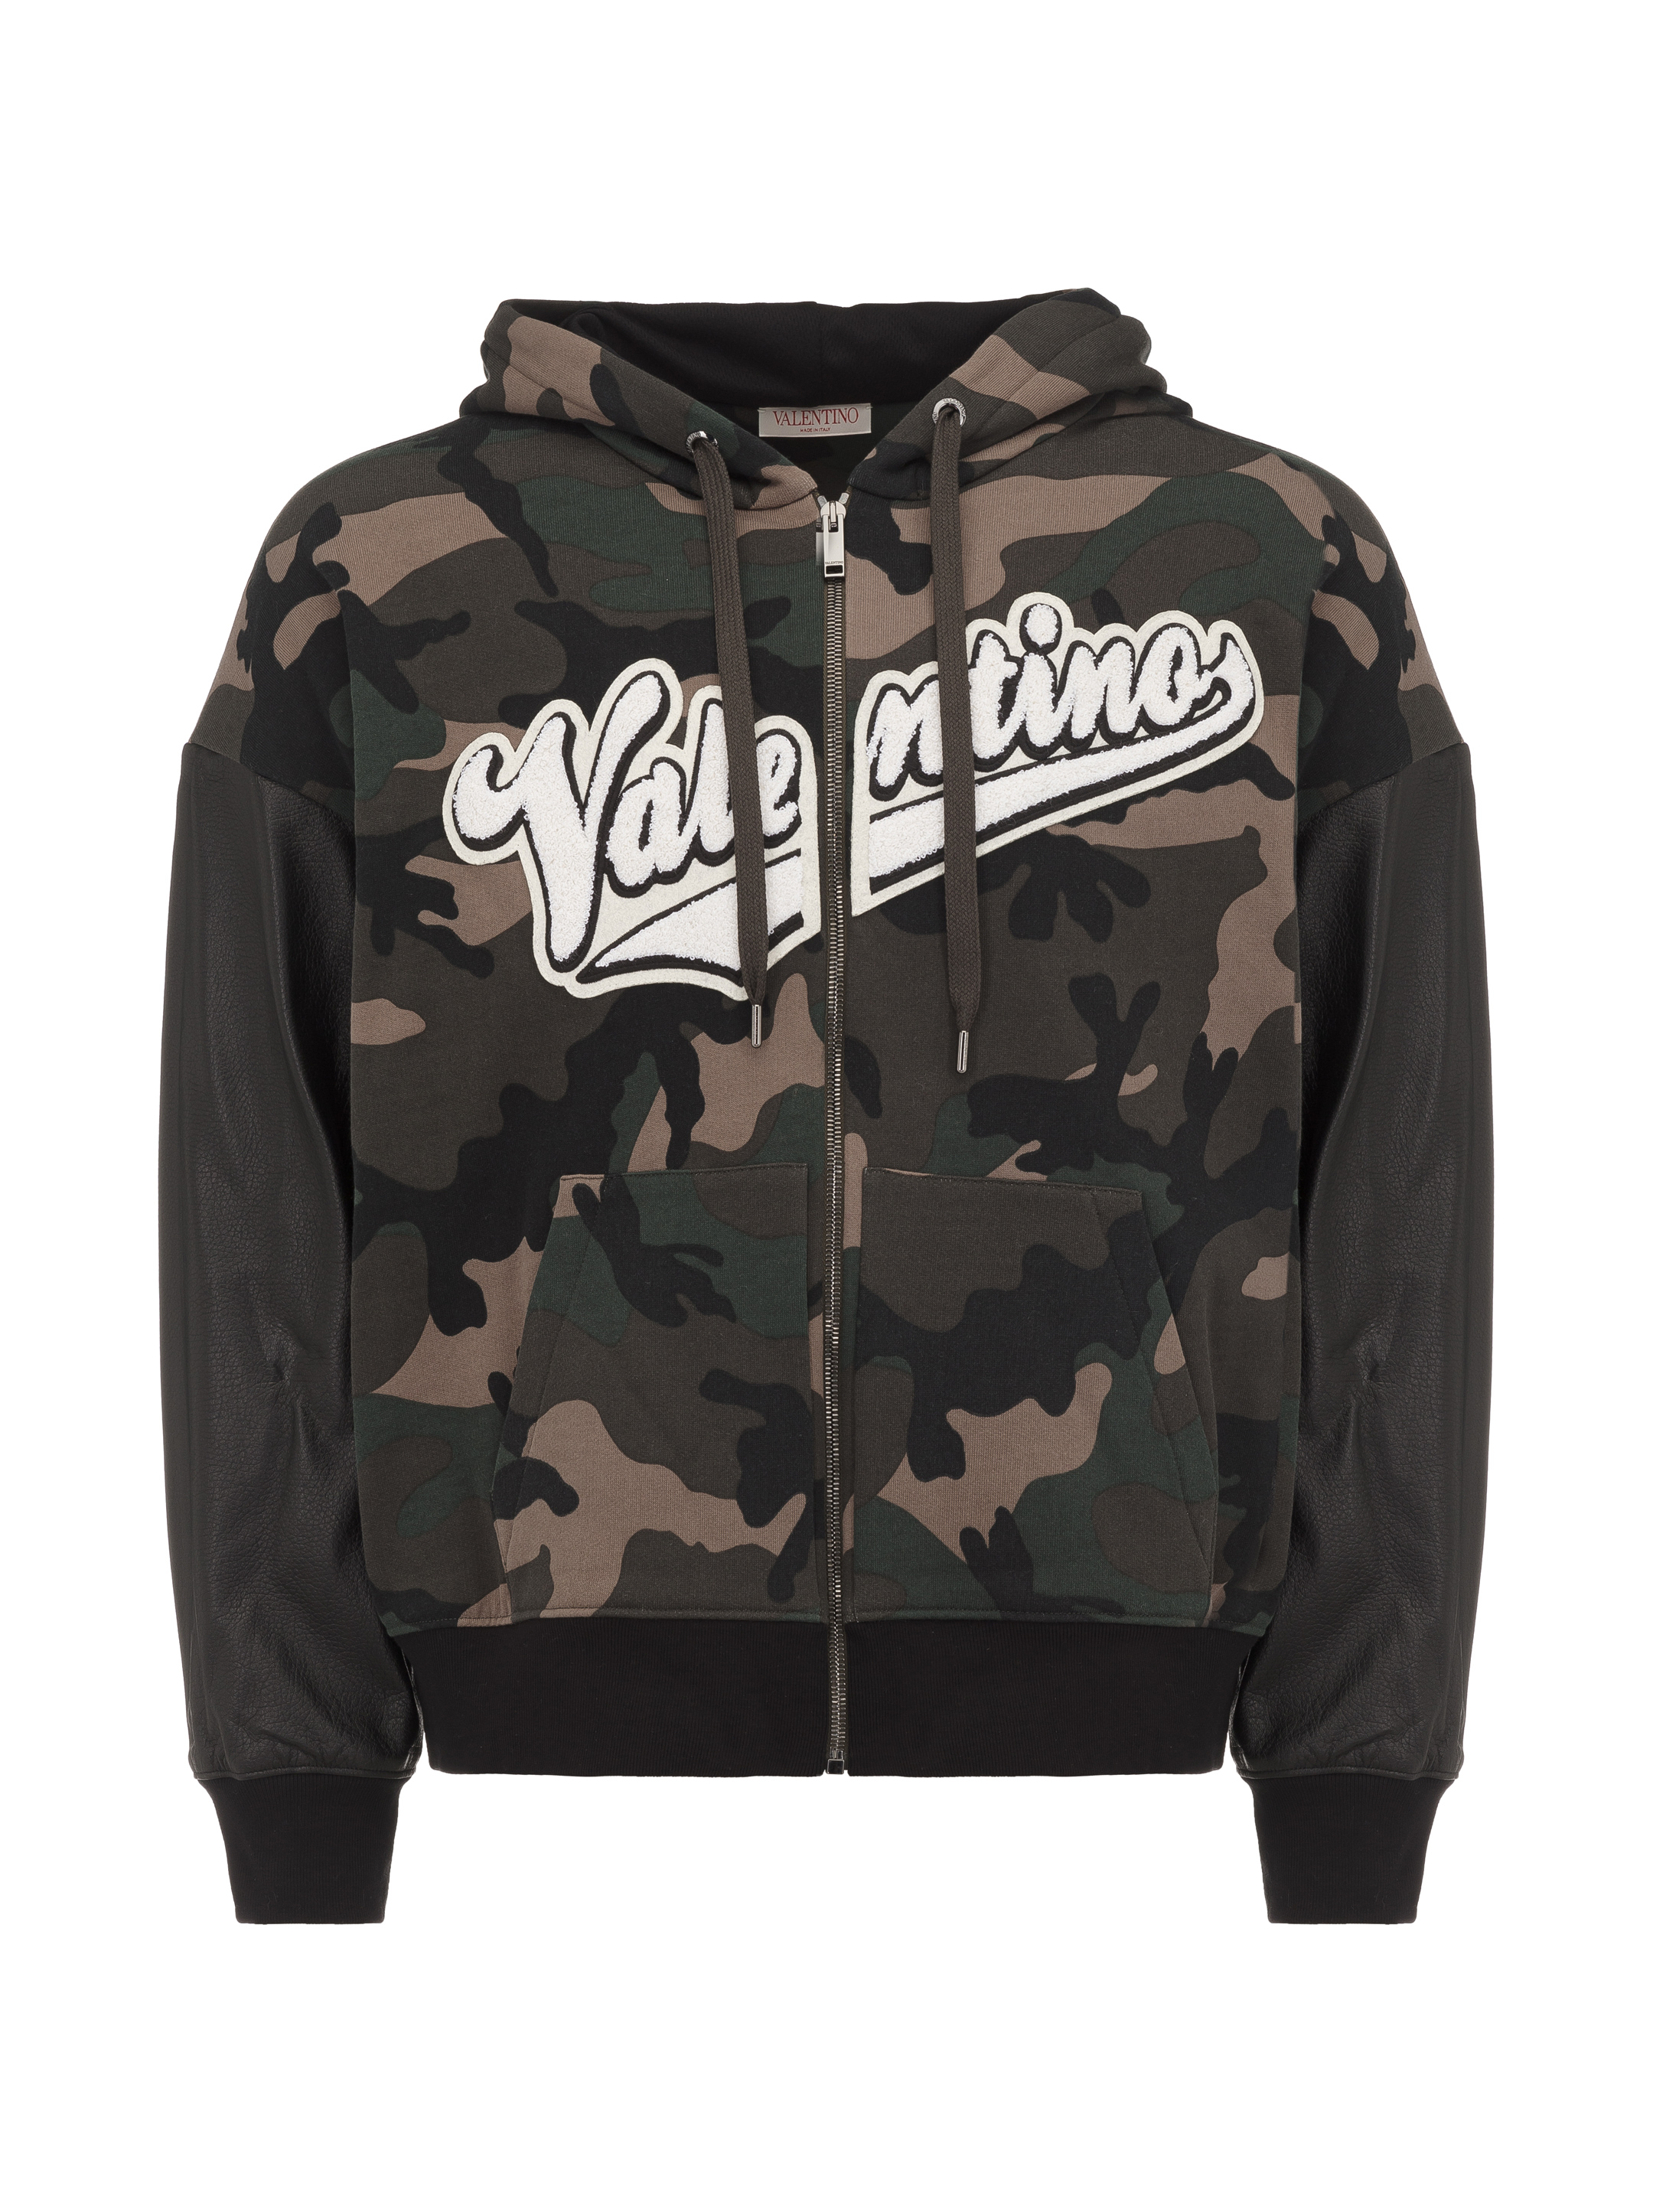 Valentino men's zip-up hoodie - for 1172600 KZT in the official online store, art. 1V3MF23P8M4 FELPA COTONE.F00_M_222